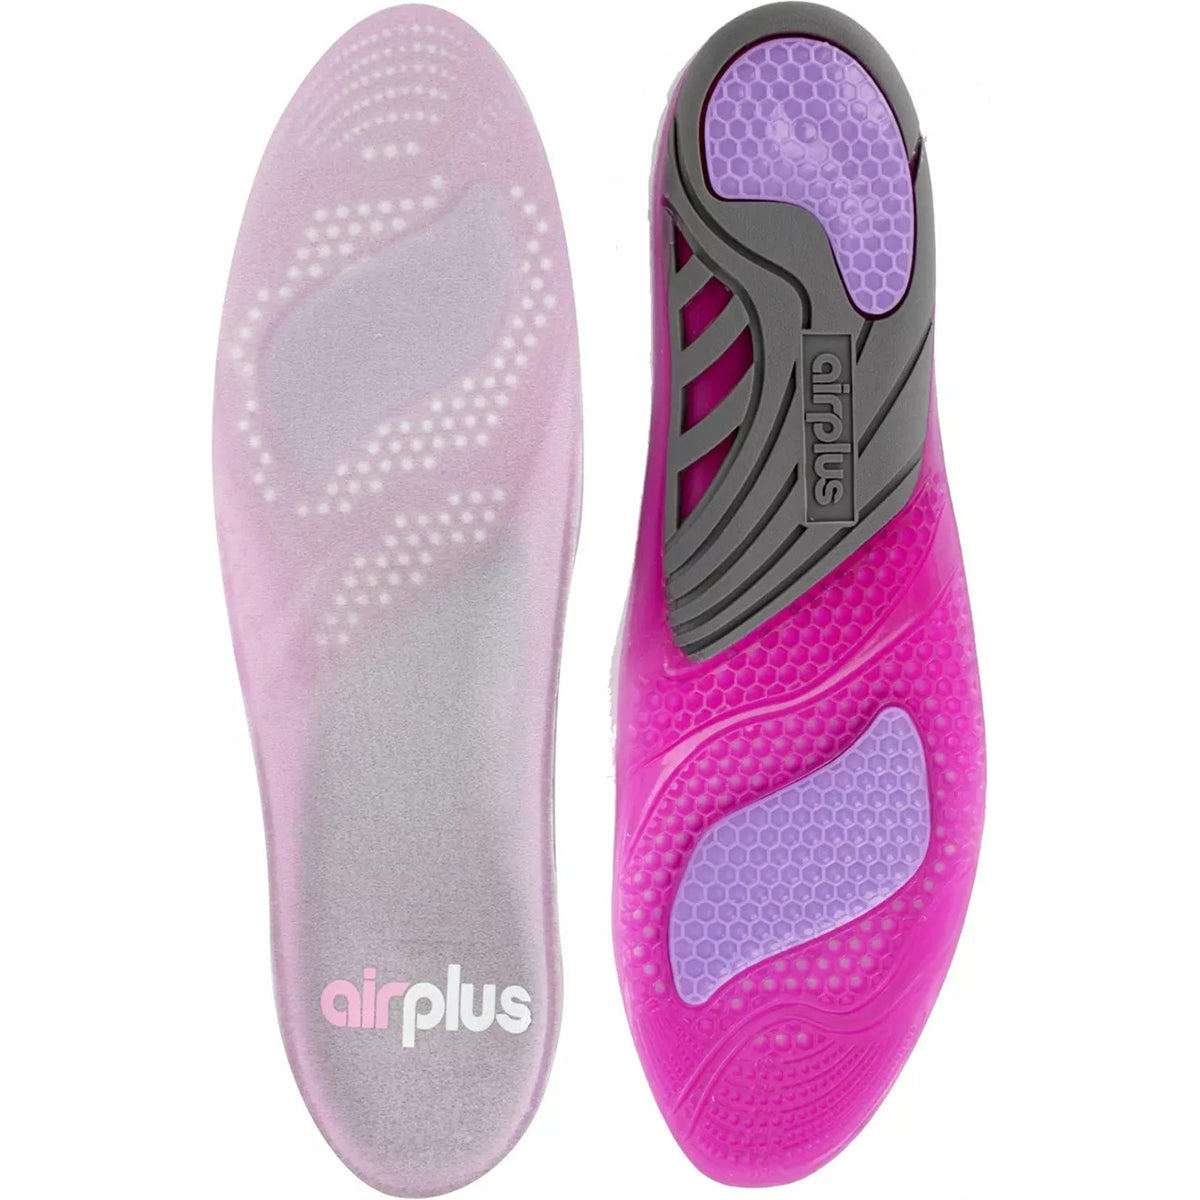 Airplus Women's Size 5-11 Amazing Active Breathable Lightweight Gel Shoe Insole Airplus